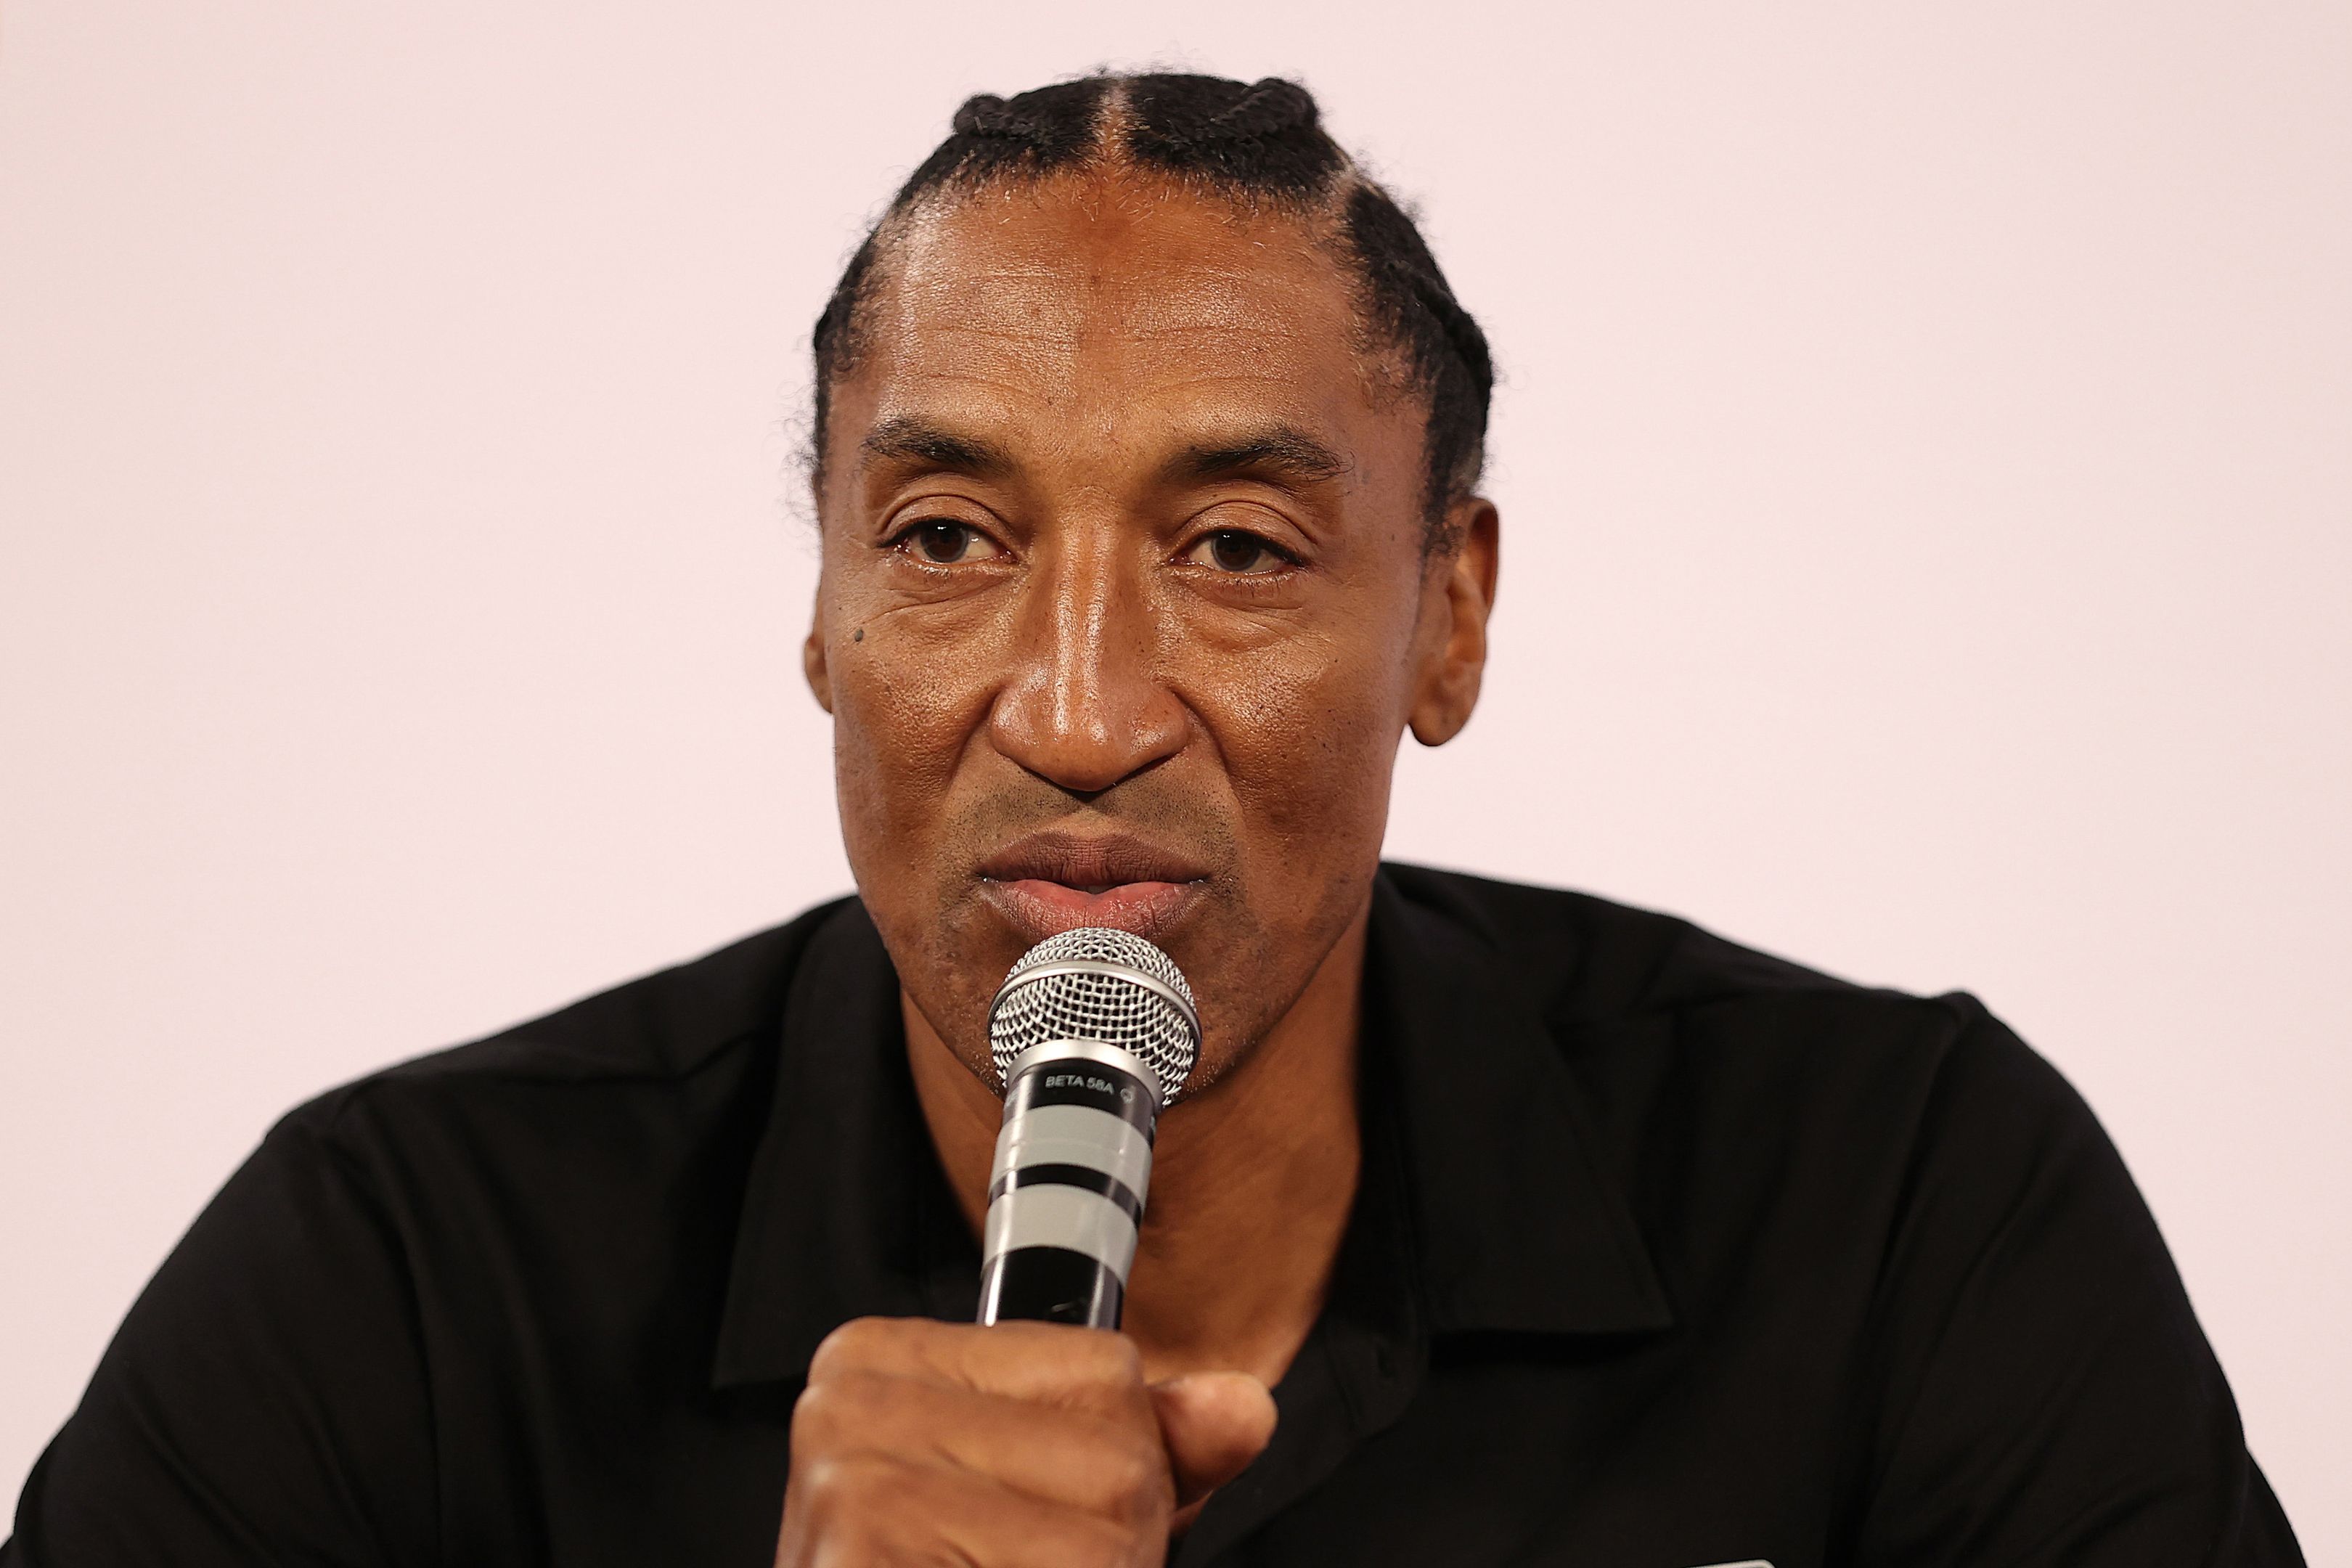 'Doing more harm than good': NBA legend Scottie Pippen takes swipe at All-Star game